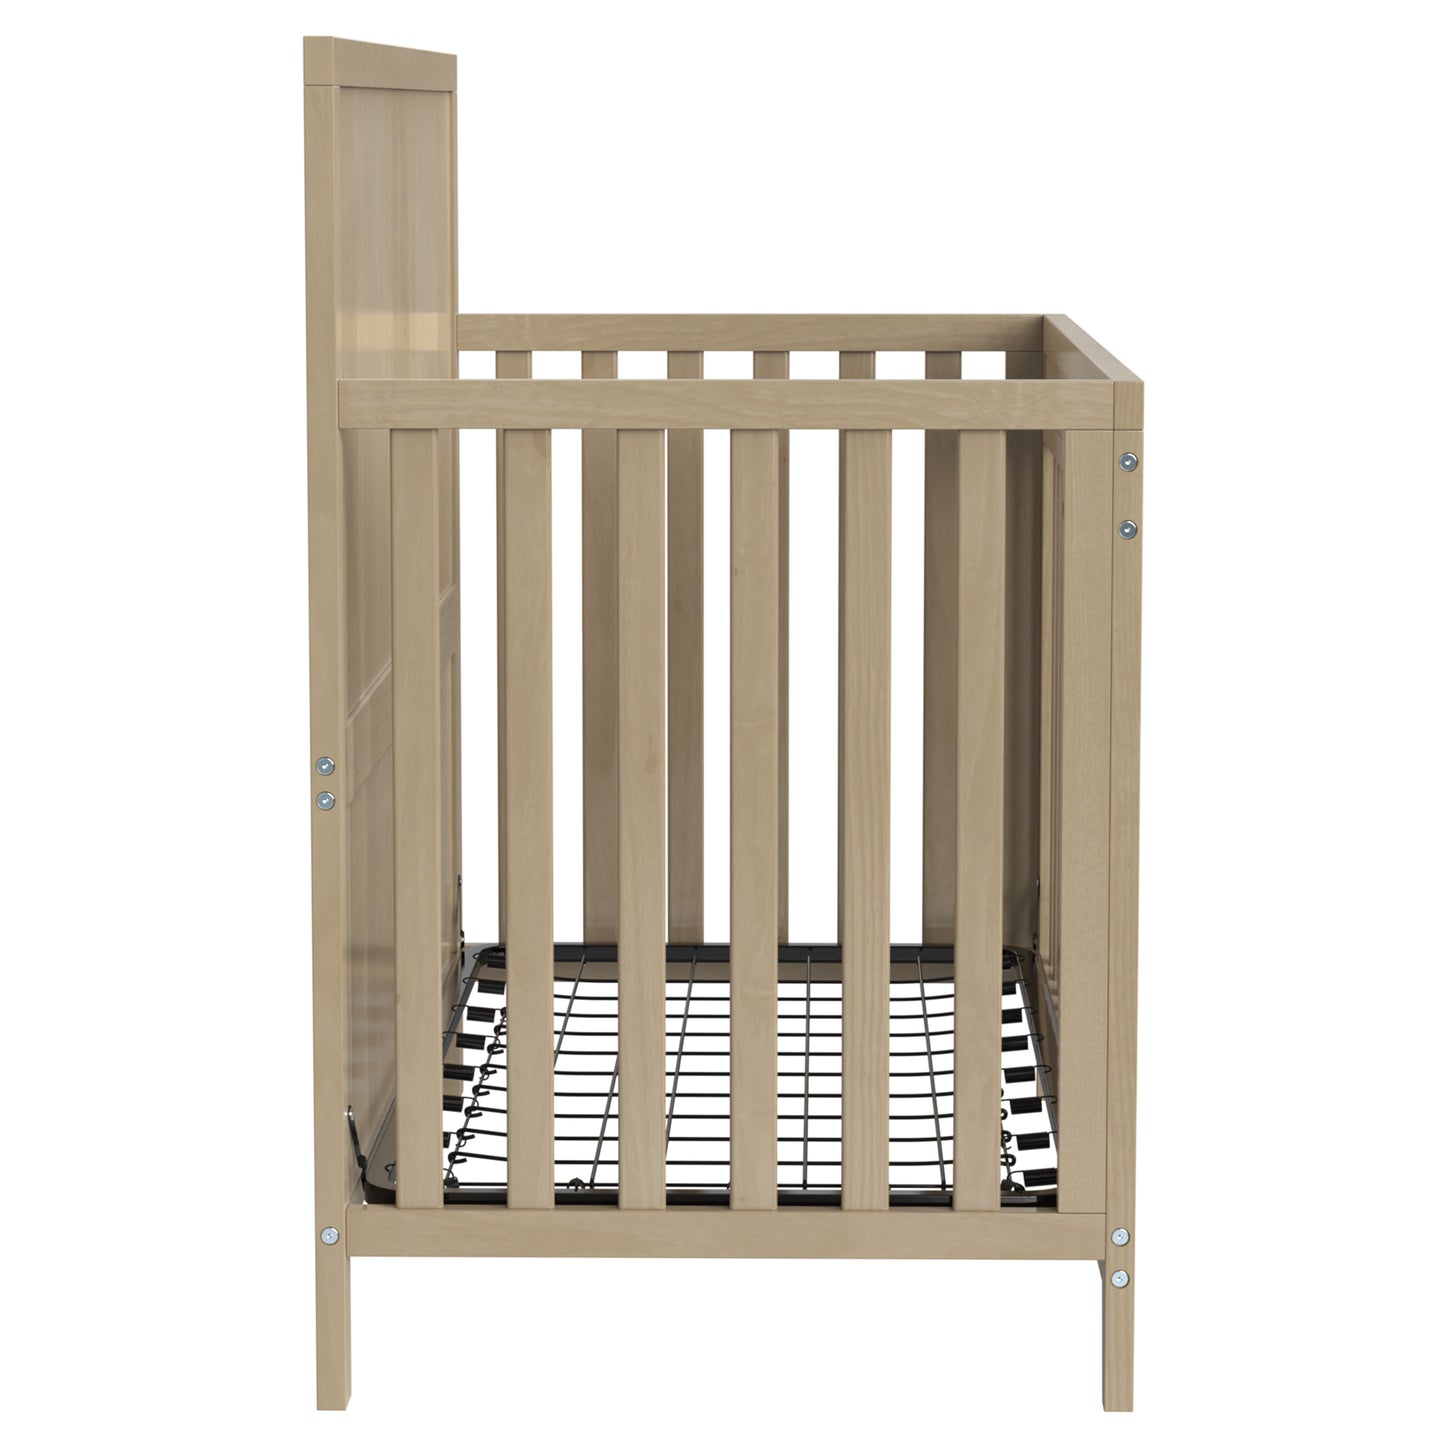 Certified Baby Safe Crib, Pine Solid Wood, Non-Toxic Finish, Hazel Wood